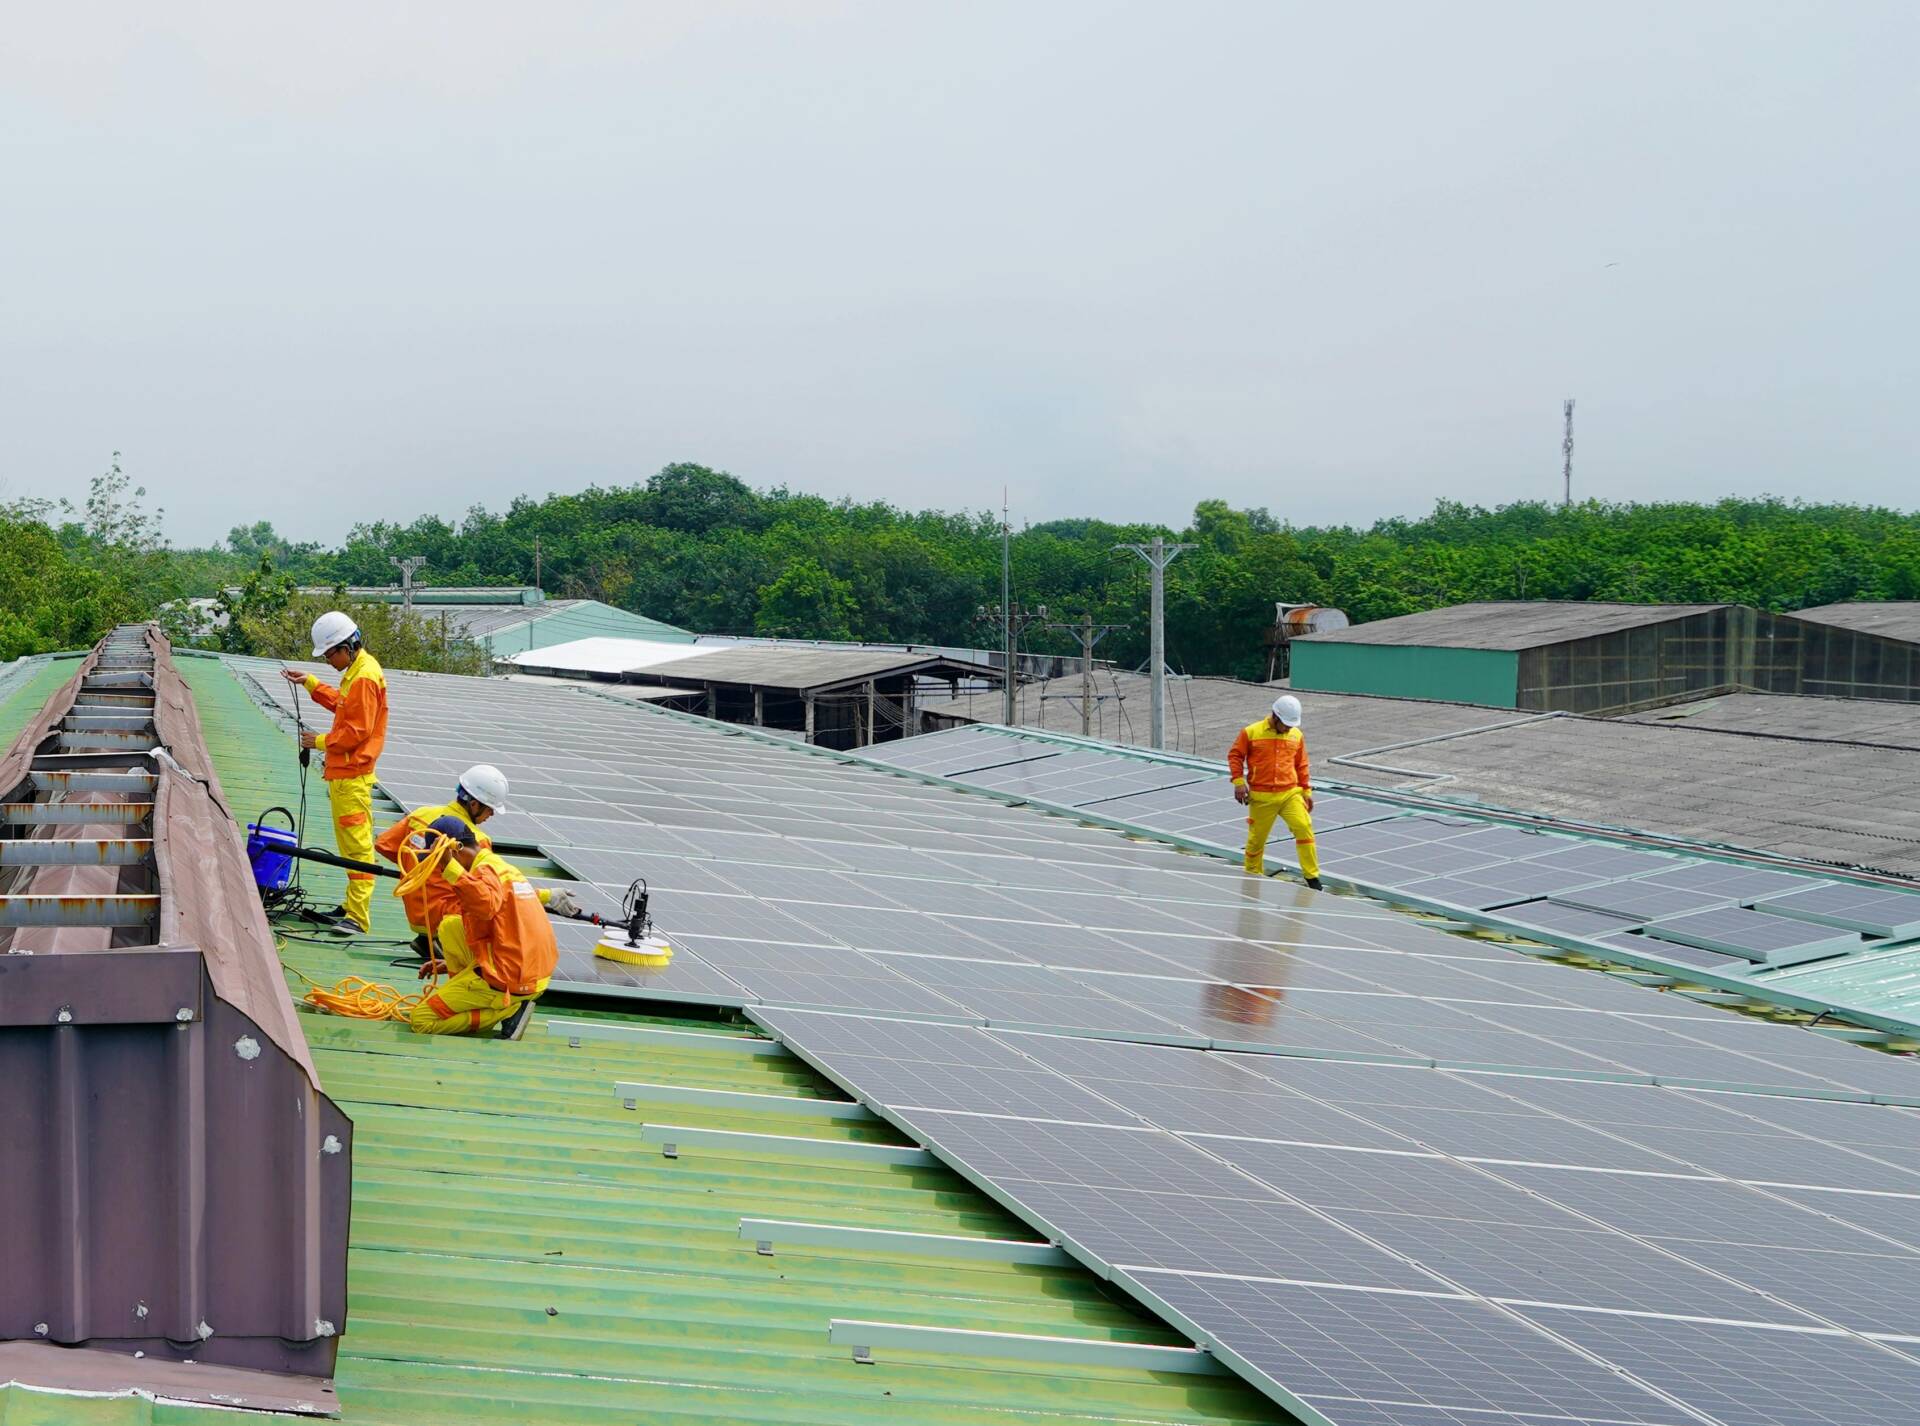 Solar power plant operations and maintenance